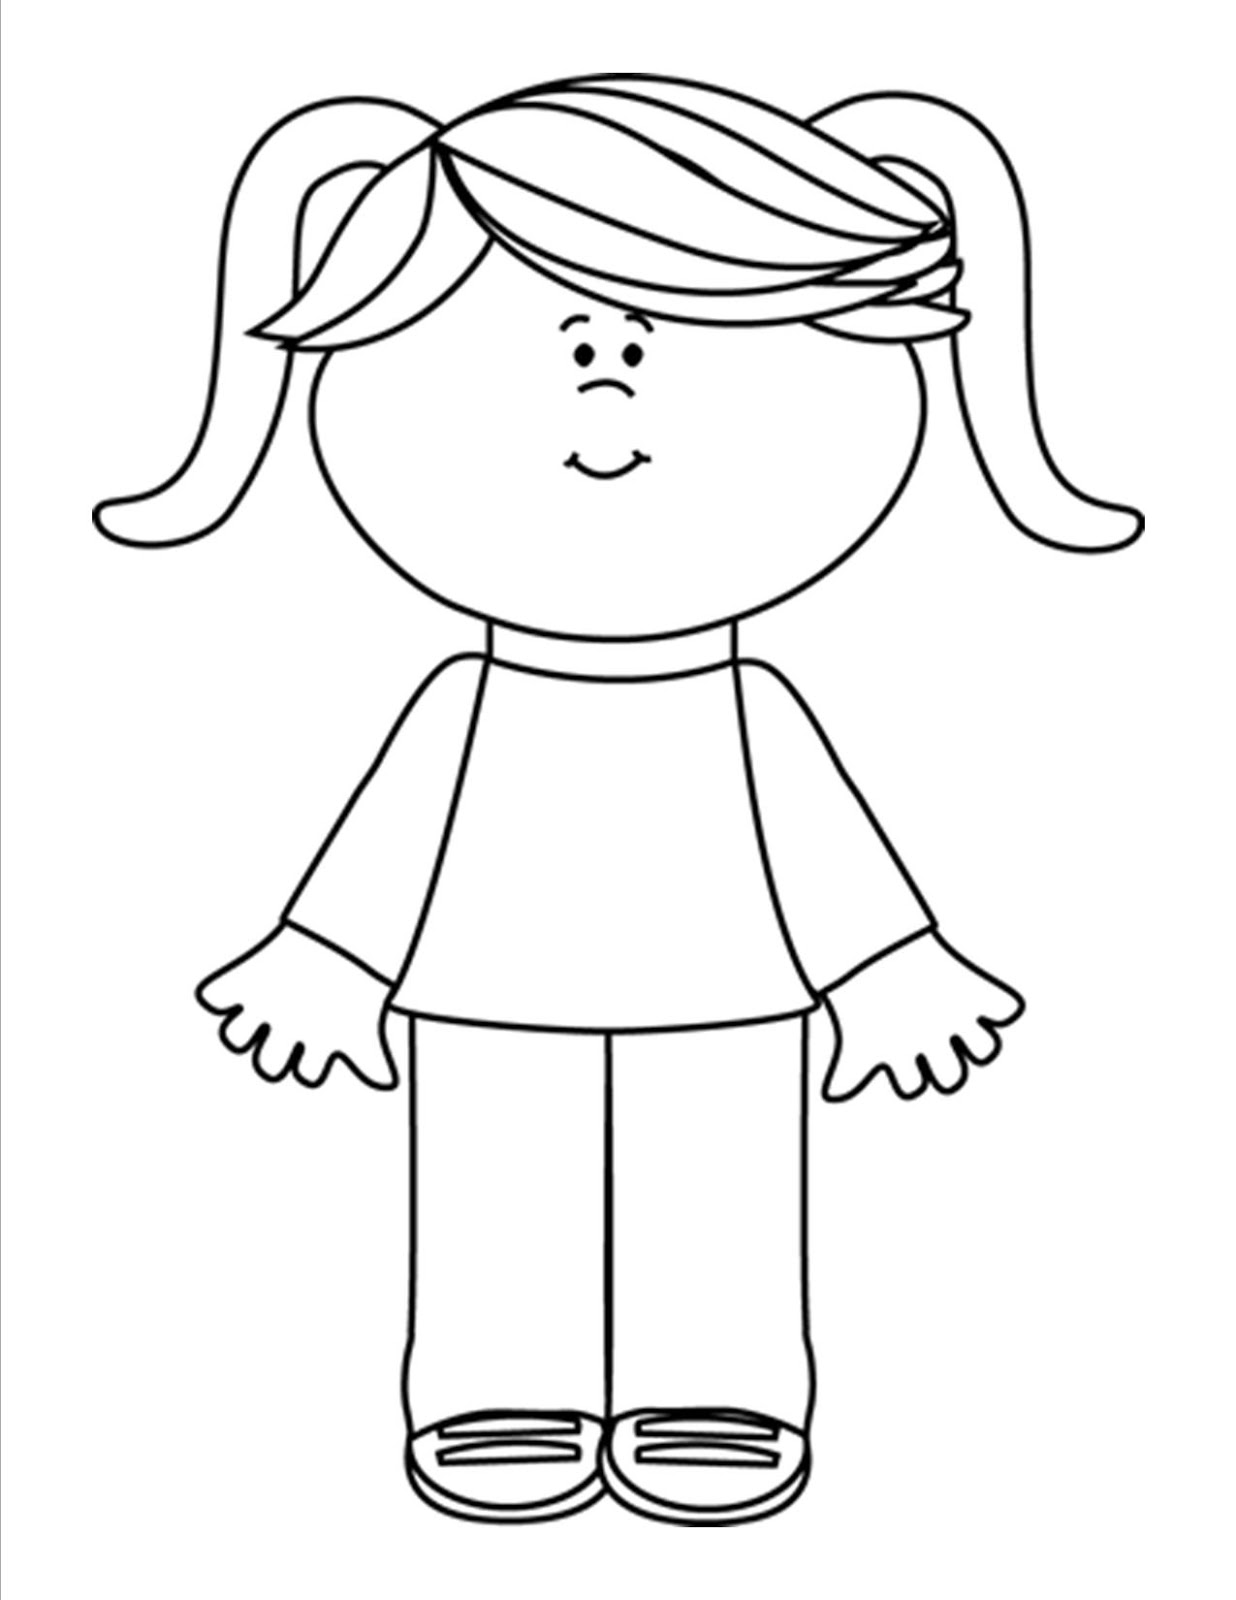 boy and girl outline clip art - photo #5